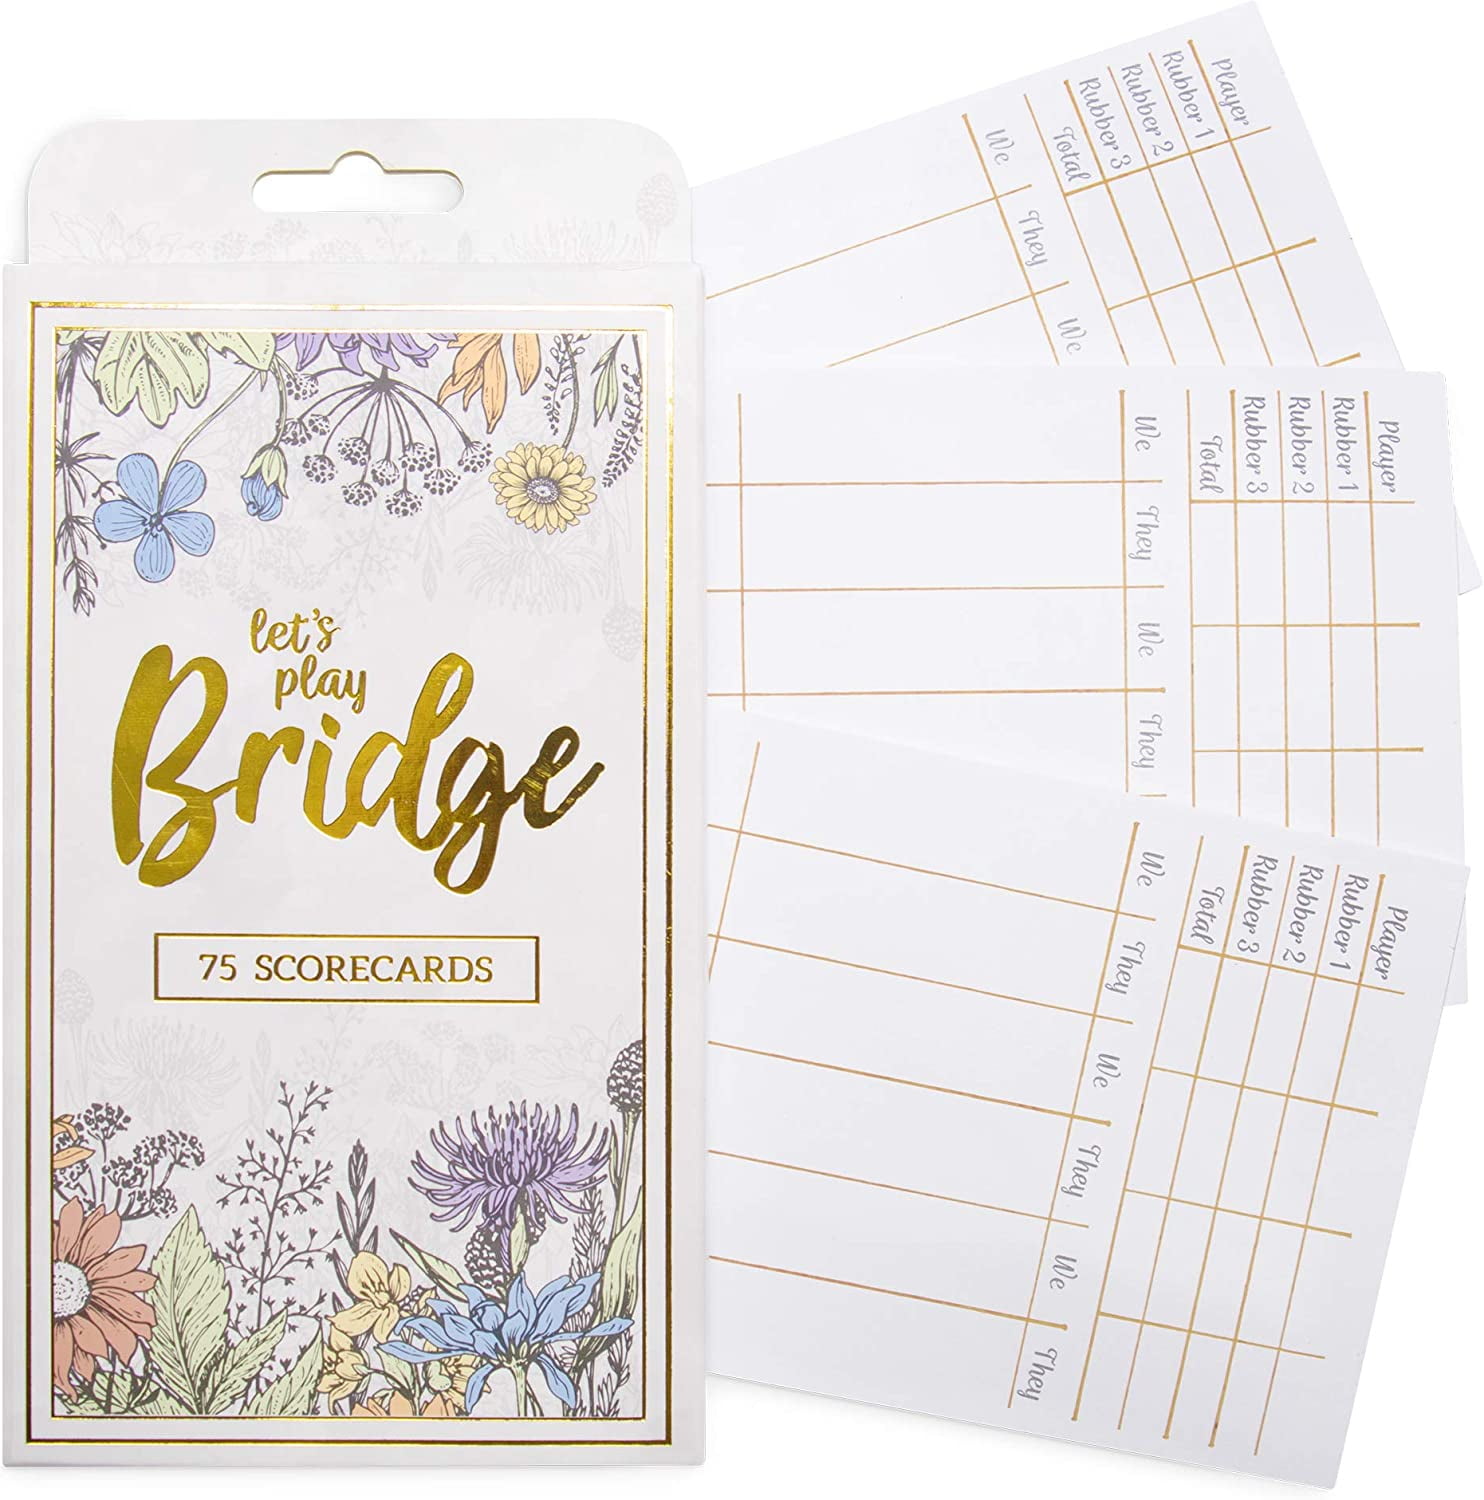 Picture of Brybelly GCAR-412 Bridge Scorecards - Pack of 75